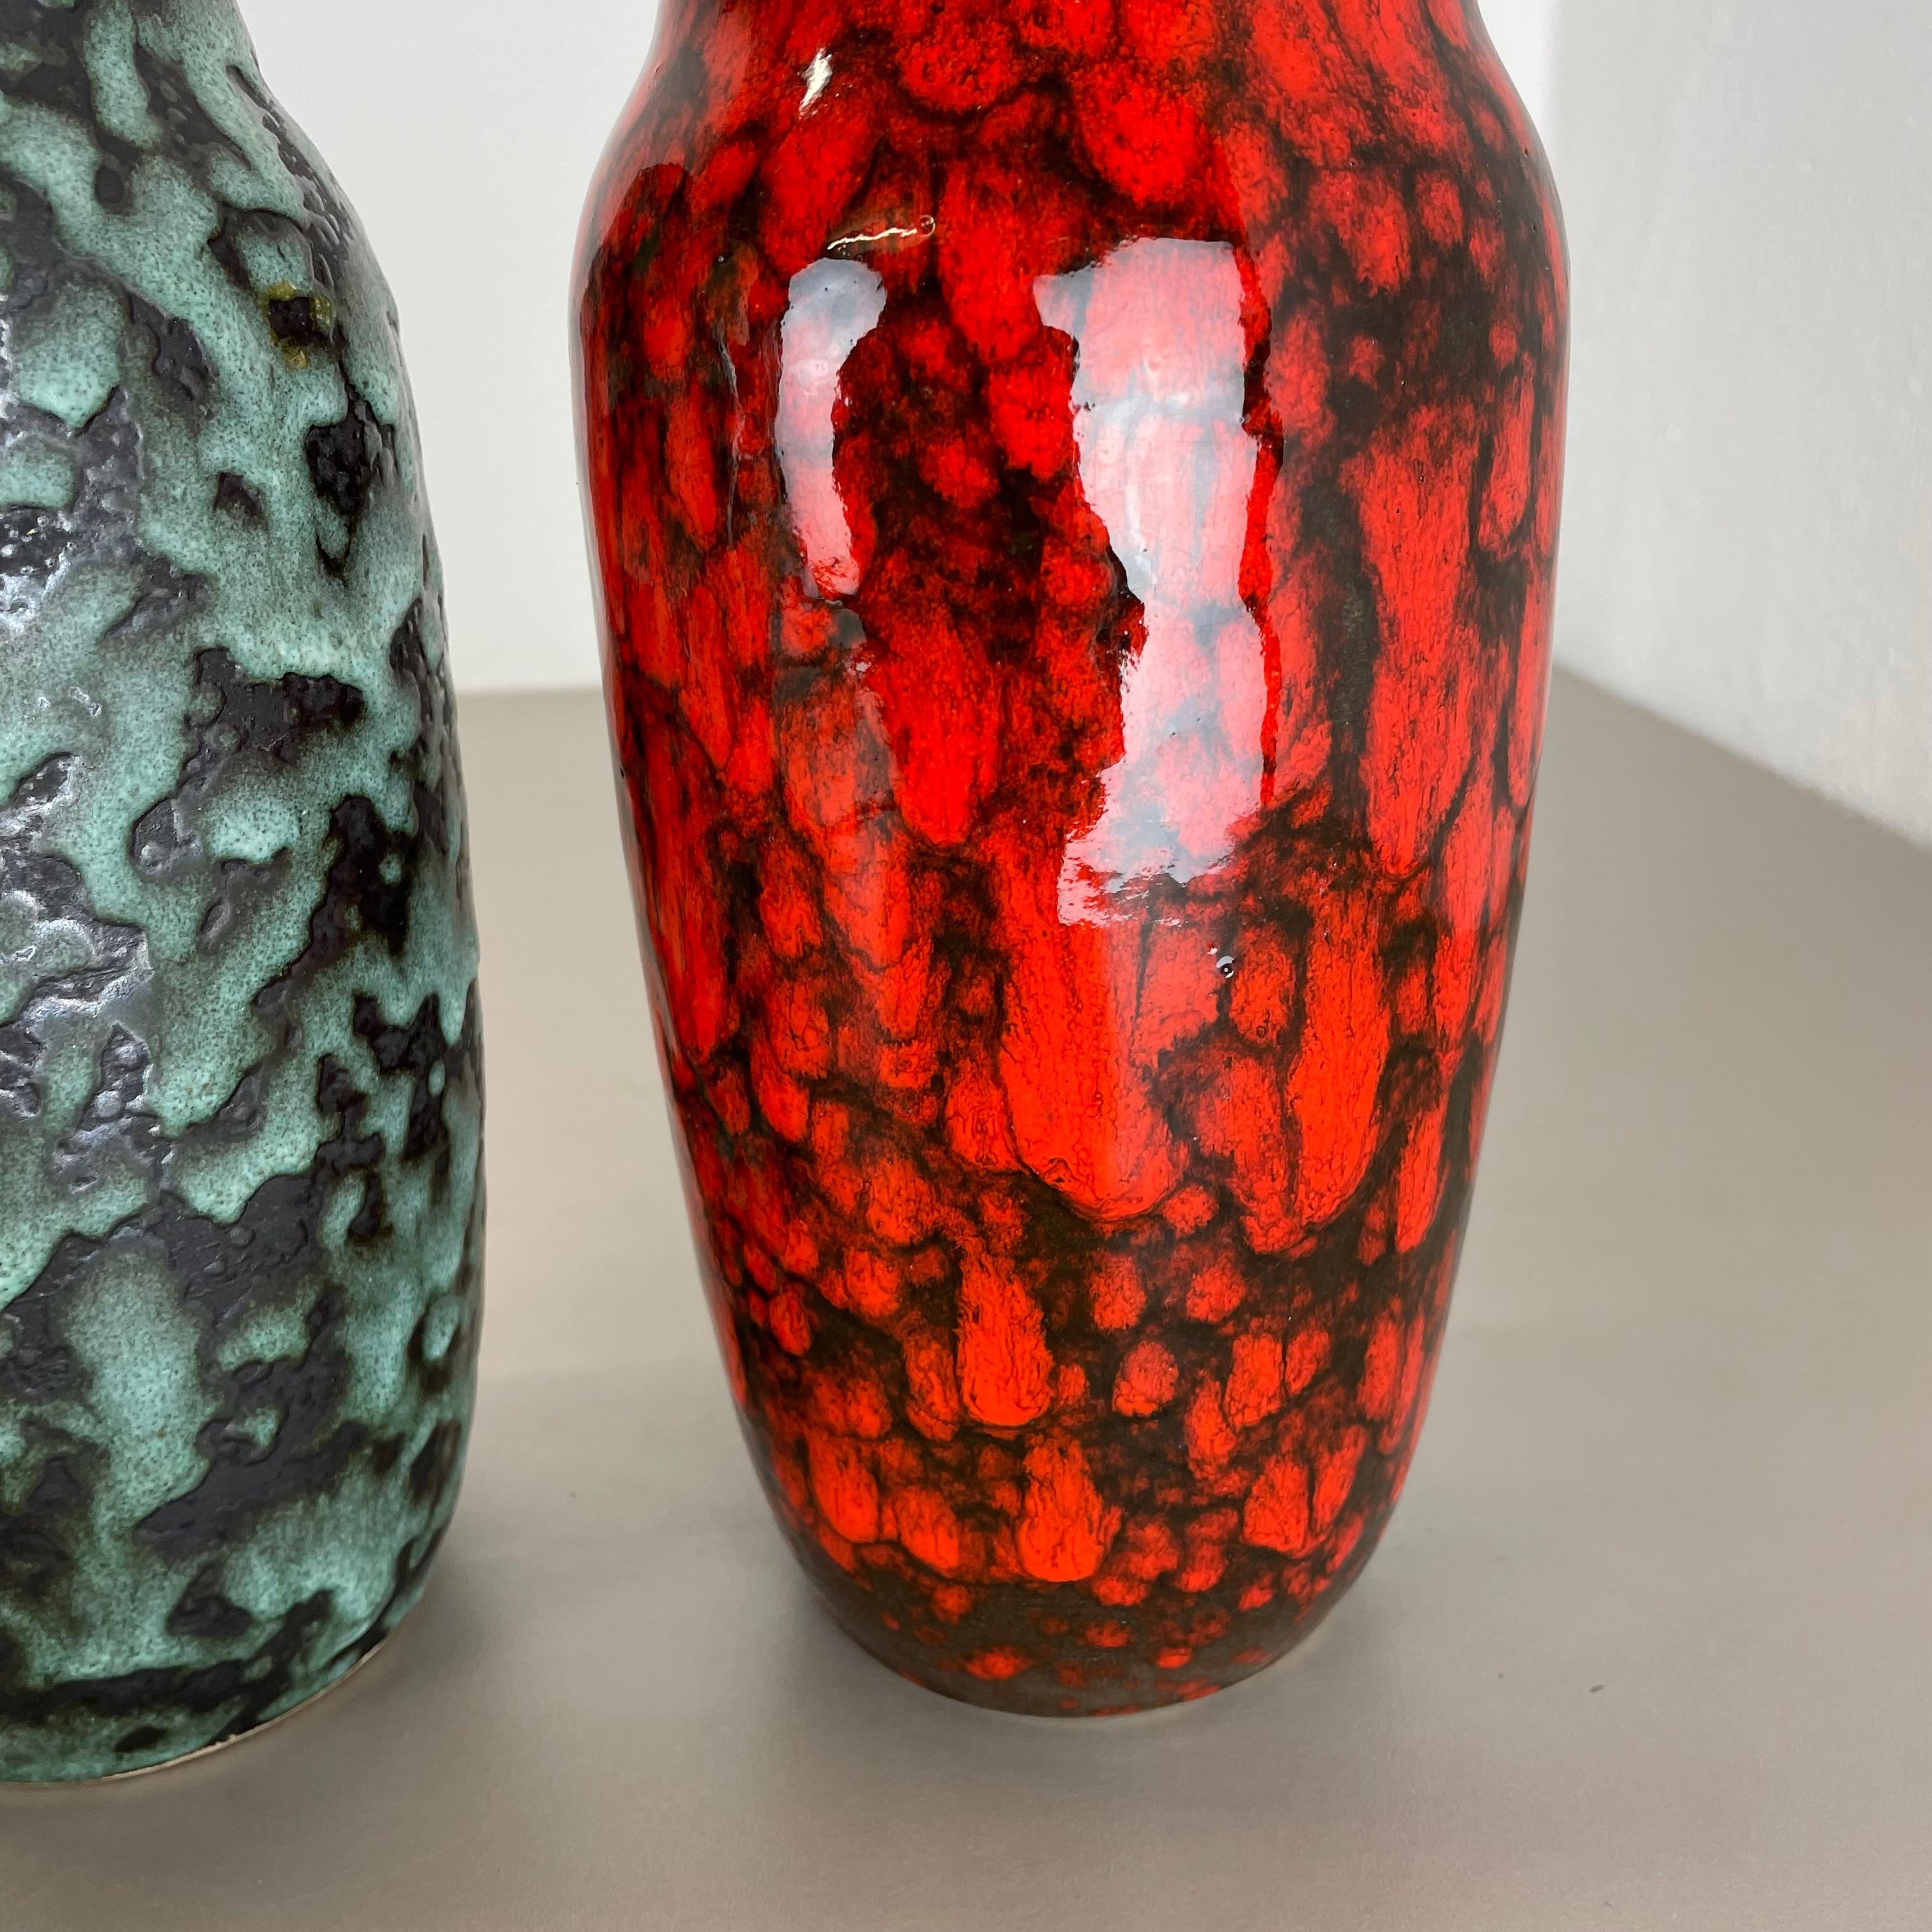 Set of 2 Rare Super Color Crusty Fat Lava Vases by Scheurich, Germany WGP, 1970s For Sale 5